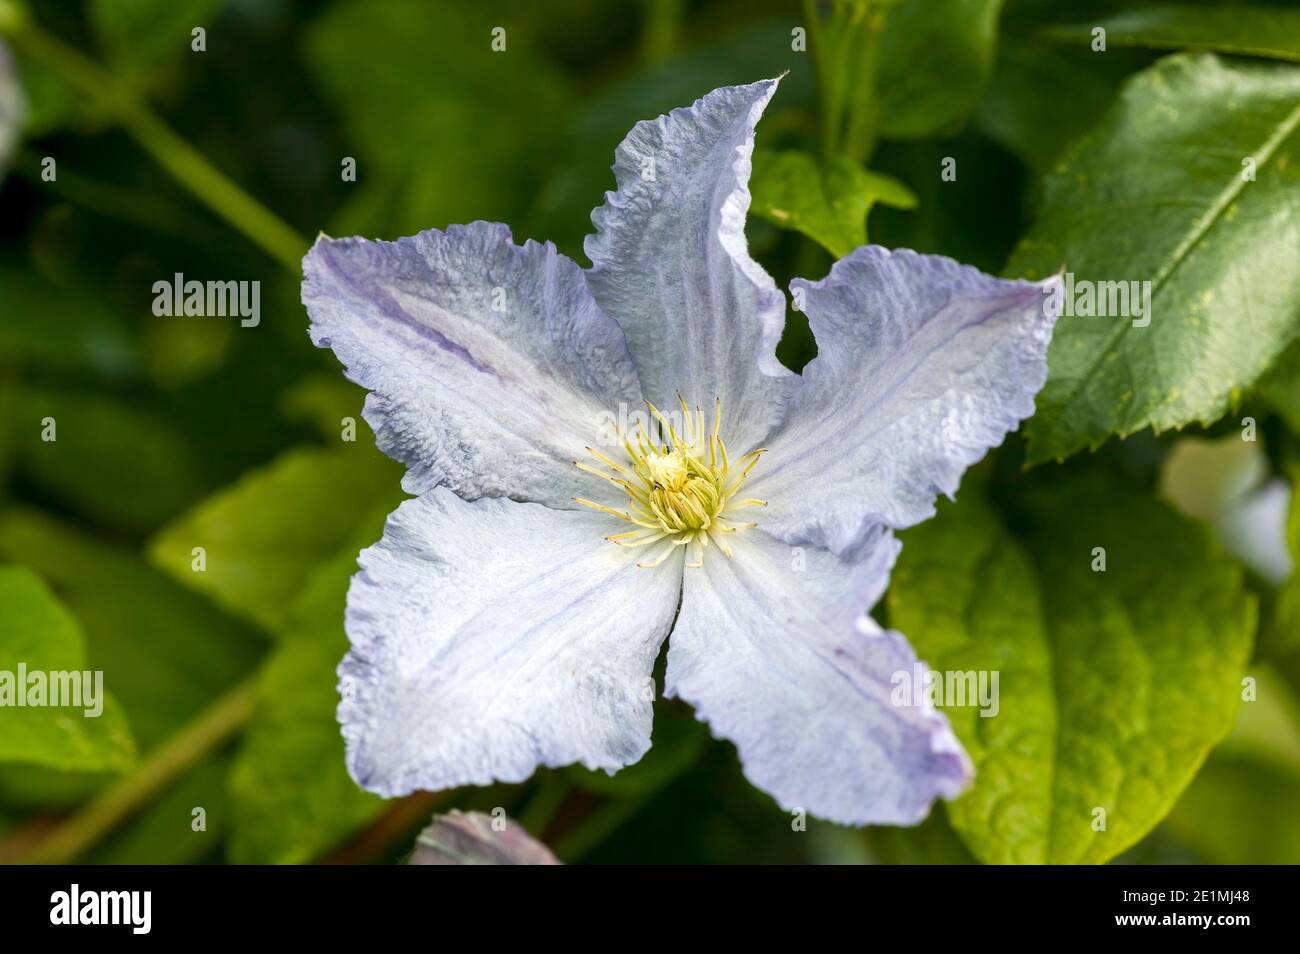 Clematis 'Blekitny Aniol' (Blue Angel) a summer flowering shrub plant with a blue lilac summertime flower which open from June until September, stock Stock Photo